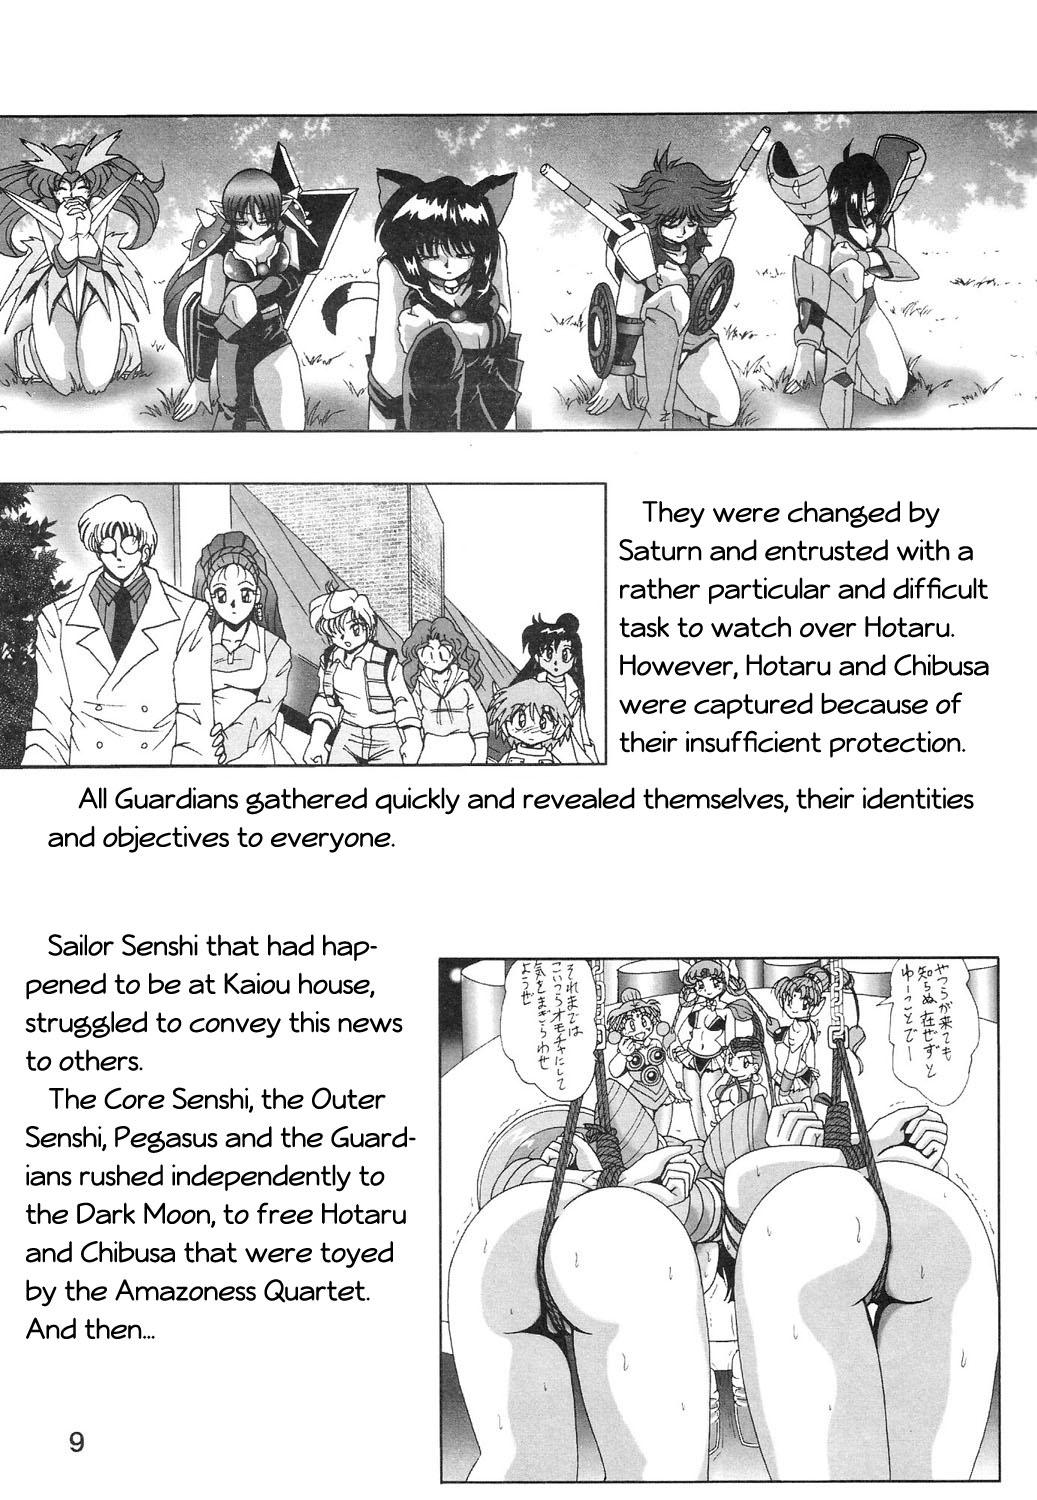 Free Blowjob Silent Saturn SS vol. 8 - Sailor moon Gayhardcore - Page 8